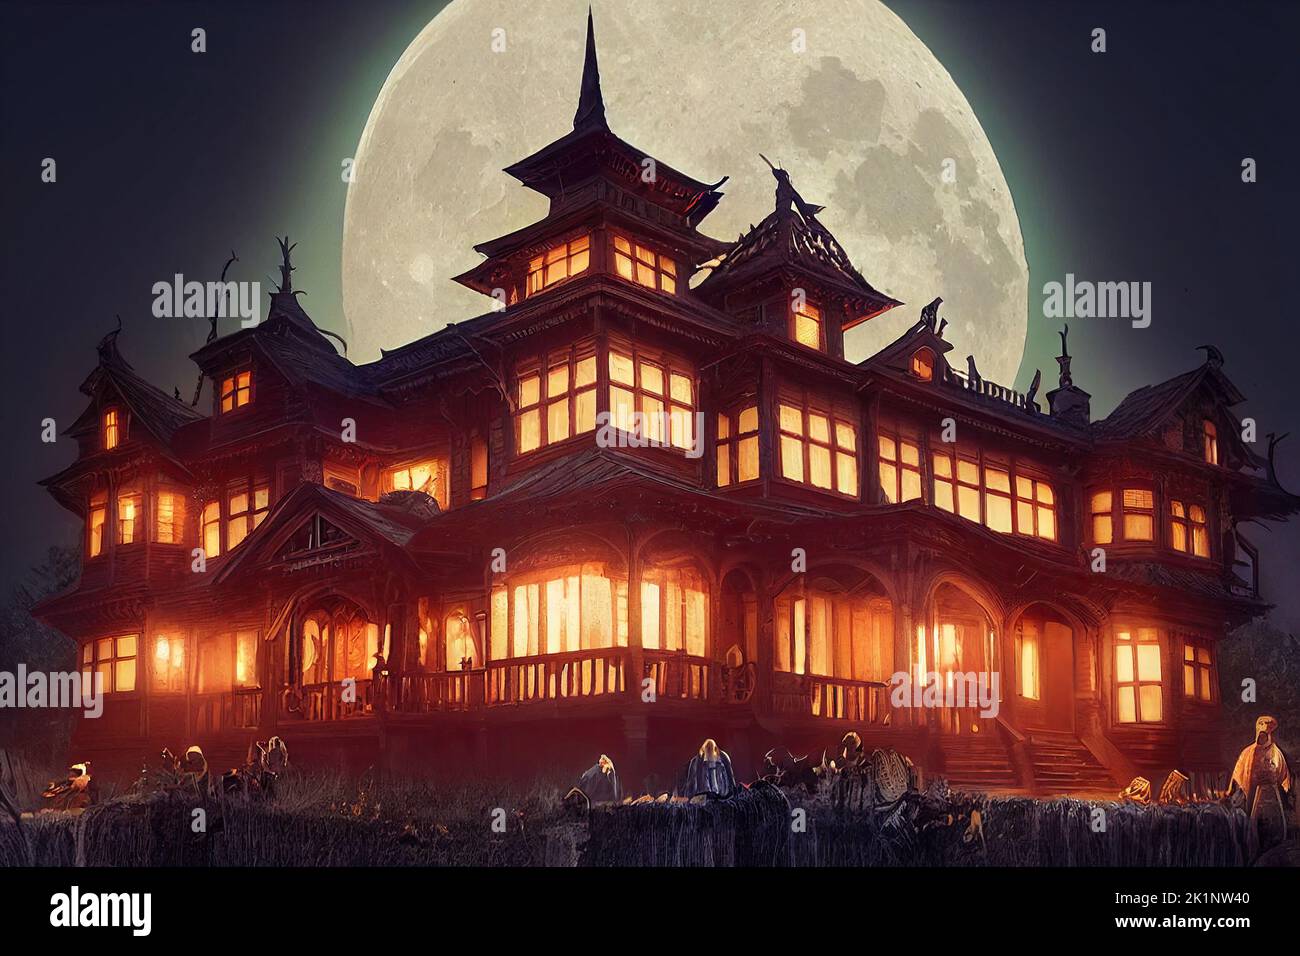 A large candlelight lit building, an old colonial house, and a full moon at night in the cemetery. Halloween horror house in the dark. 3D illustration Stock Photo